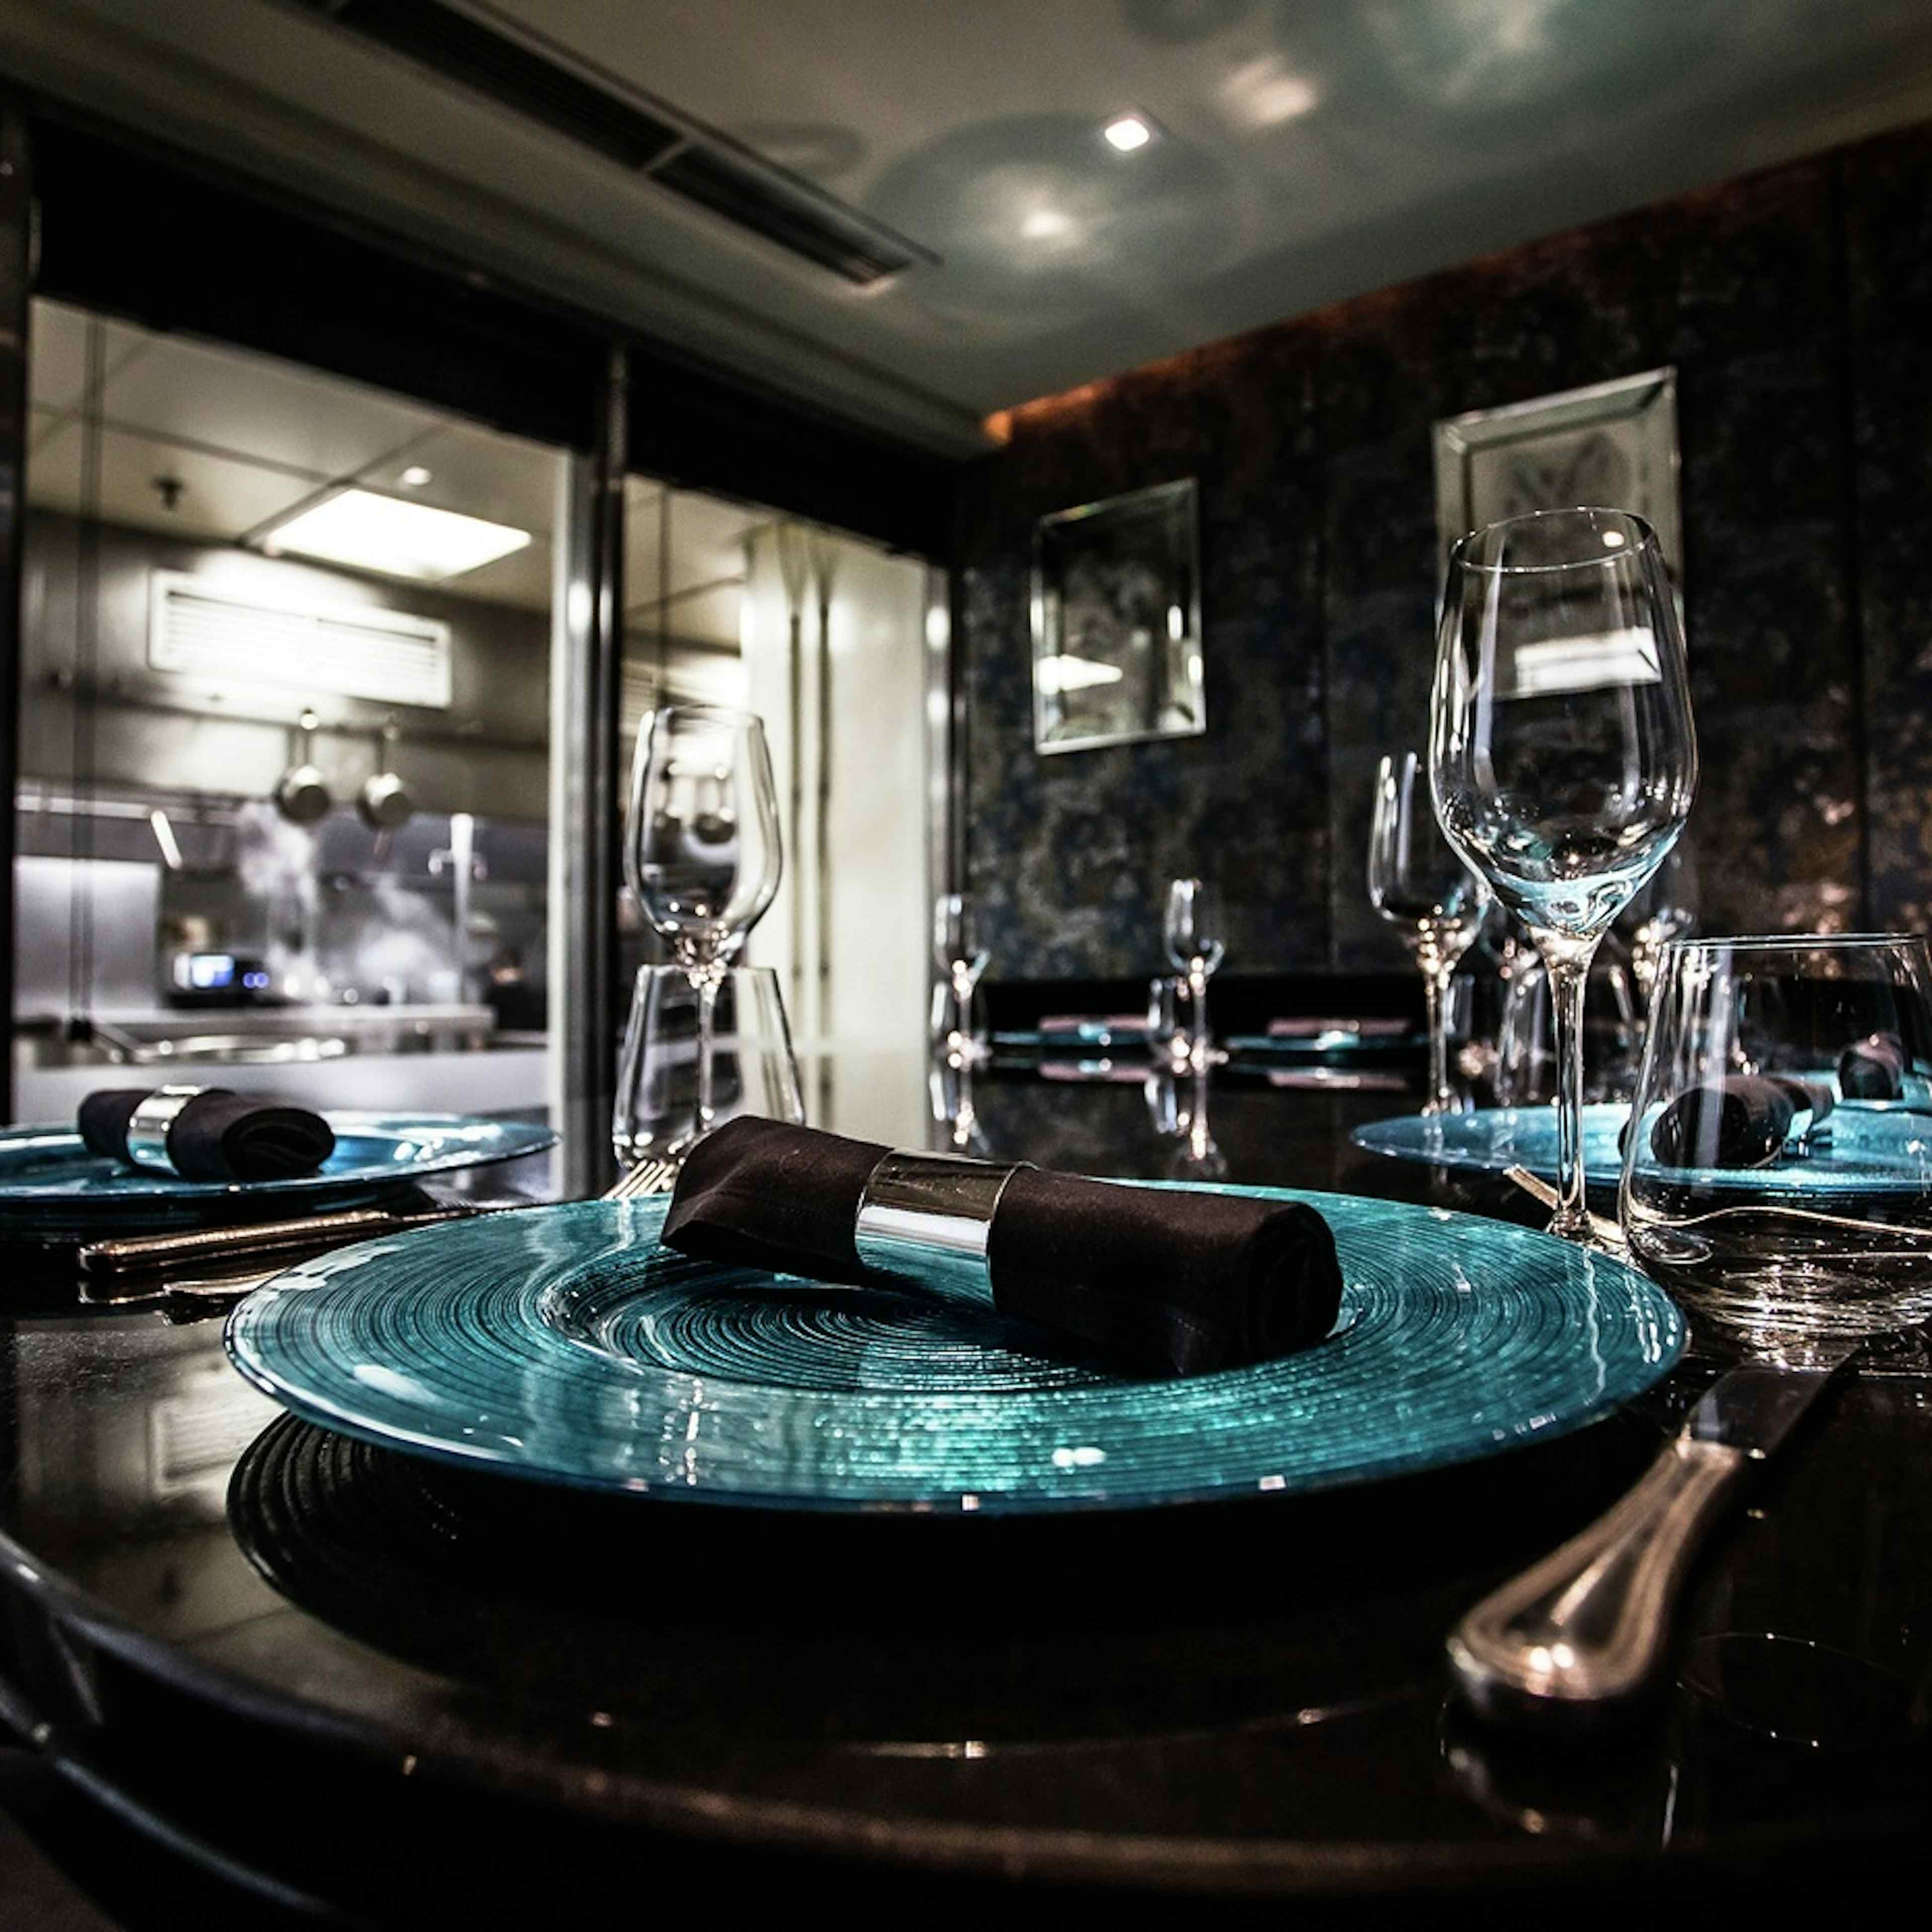 Savoy Grill - Kitchen Table image 2